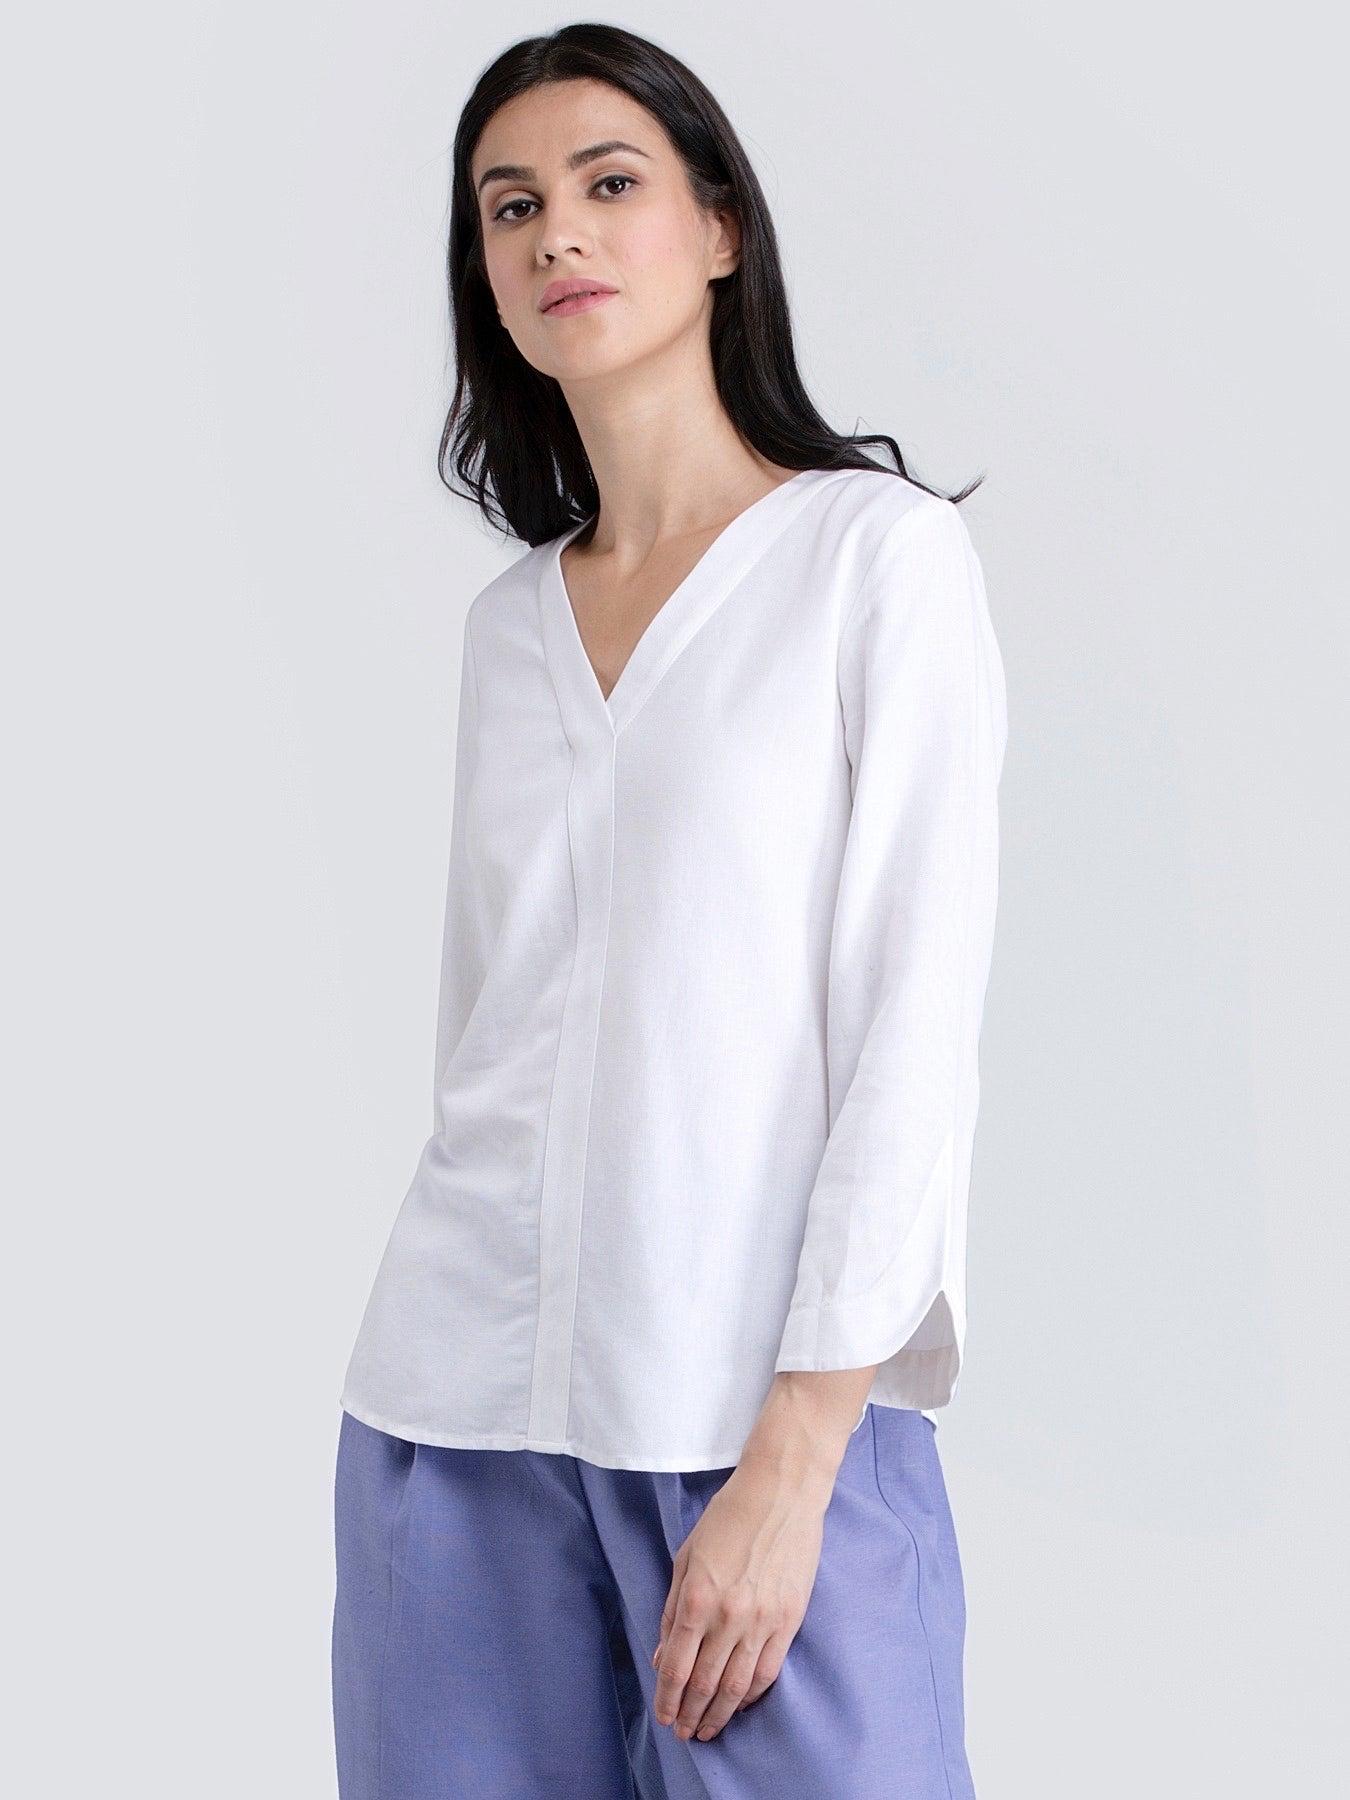 Cotton V Neck Top With Stylish Sleeves - White| Formal Tops